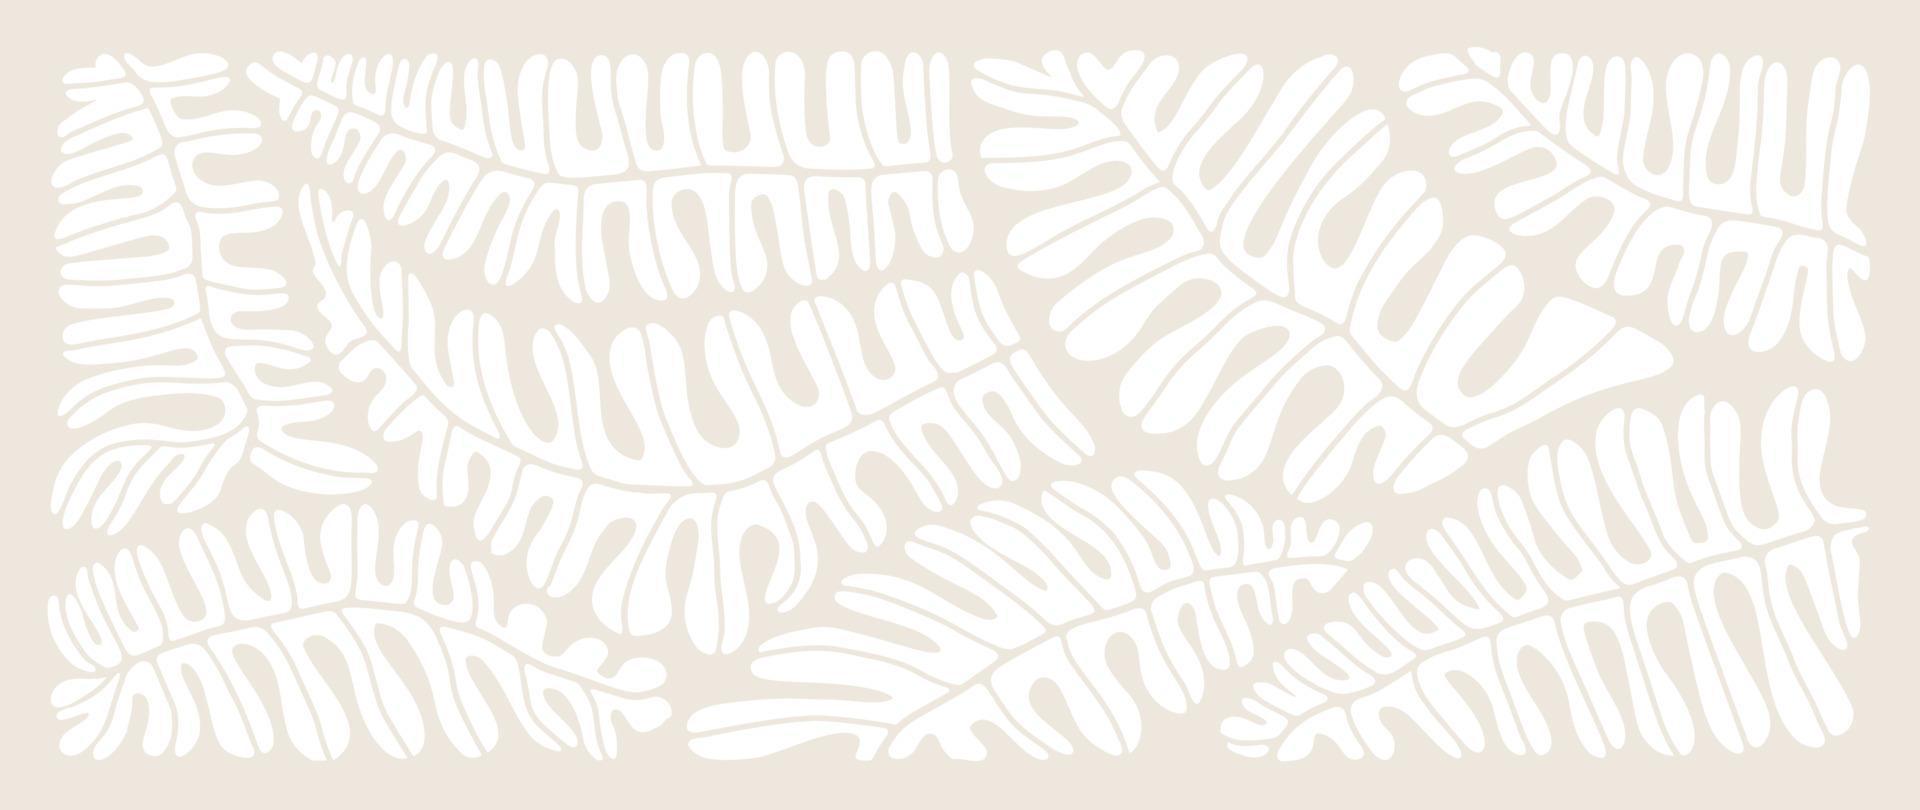 Matisse art background vector. Abstract natural hand drawn pattern design with leaves, branches. Simple contemporary style illustrated Design for fabric, print, cover, banner, wallpaper. vector